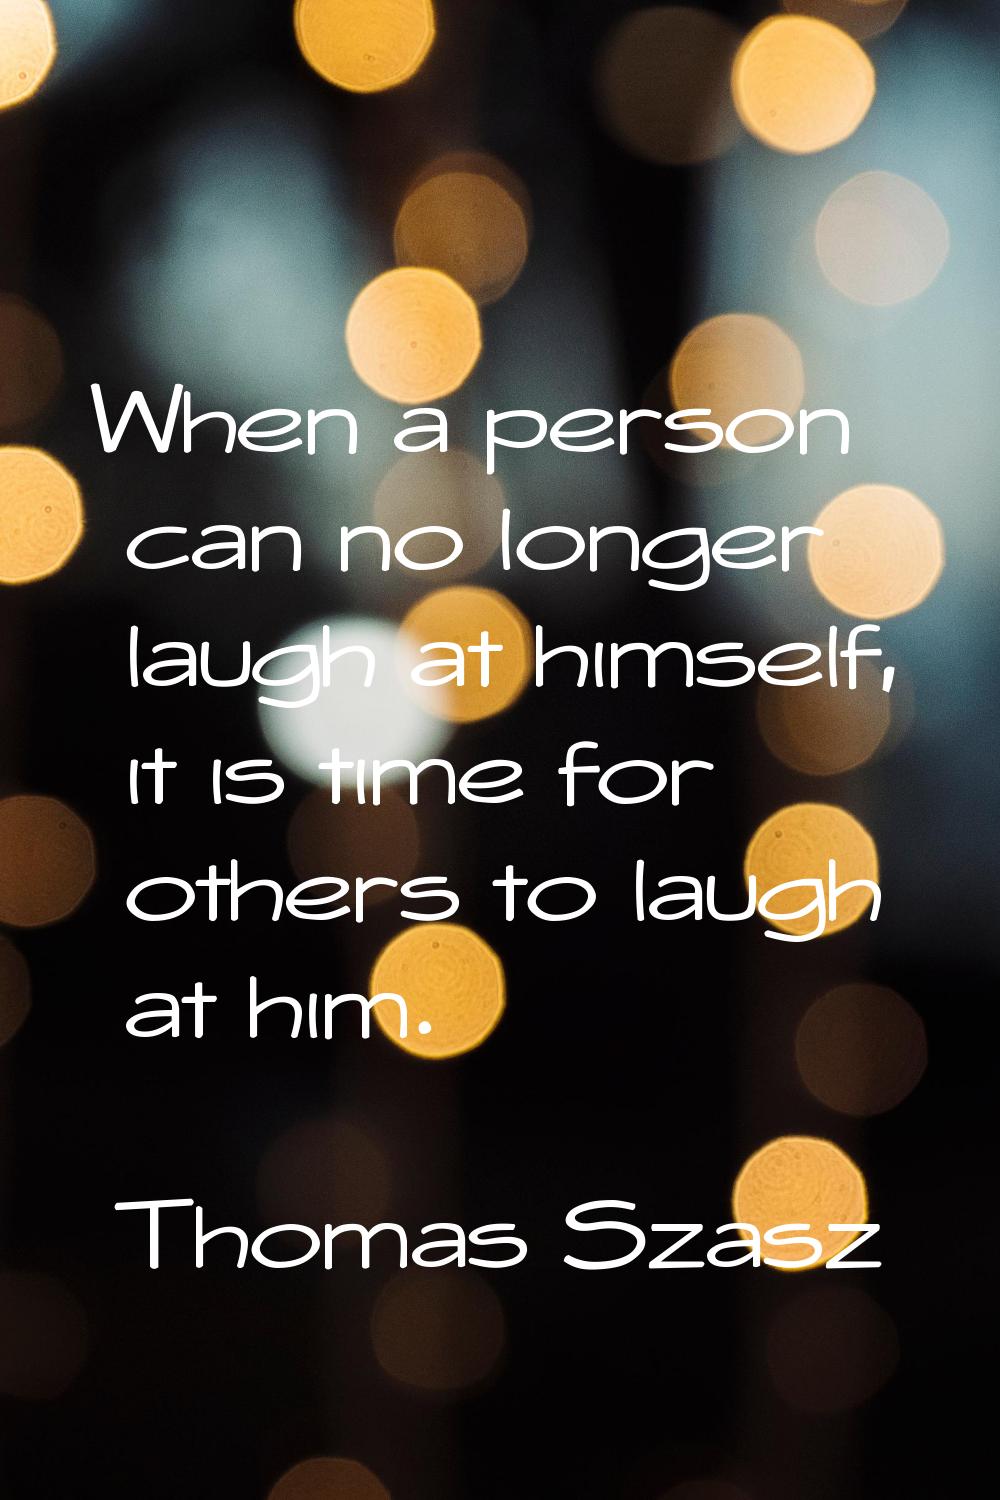 When a person can no longer laugh at himself, it is time for others to laugh at him.